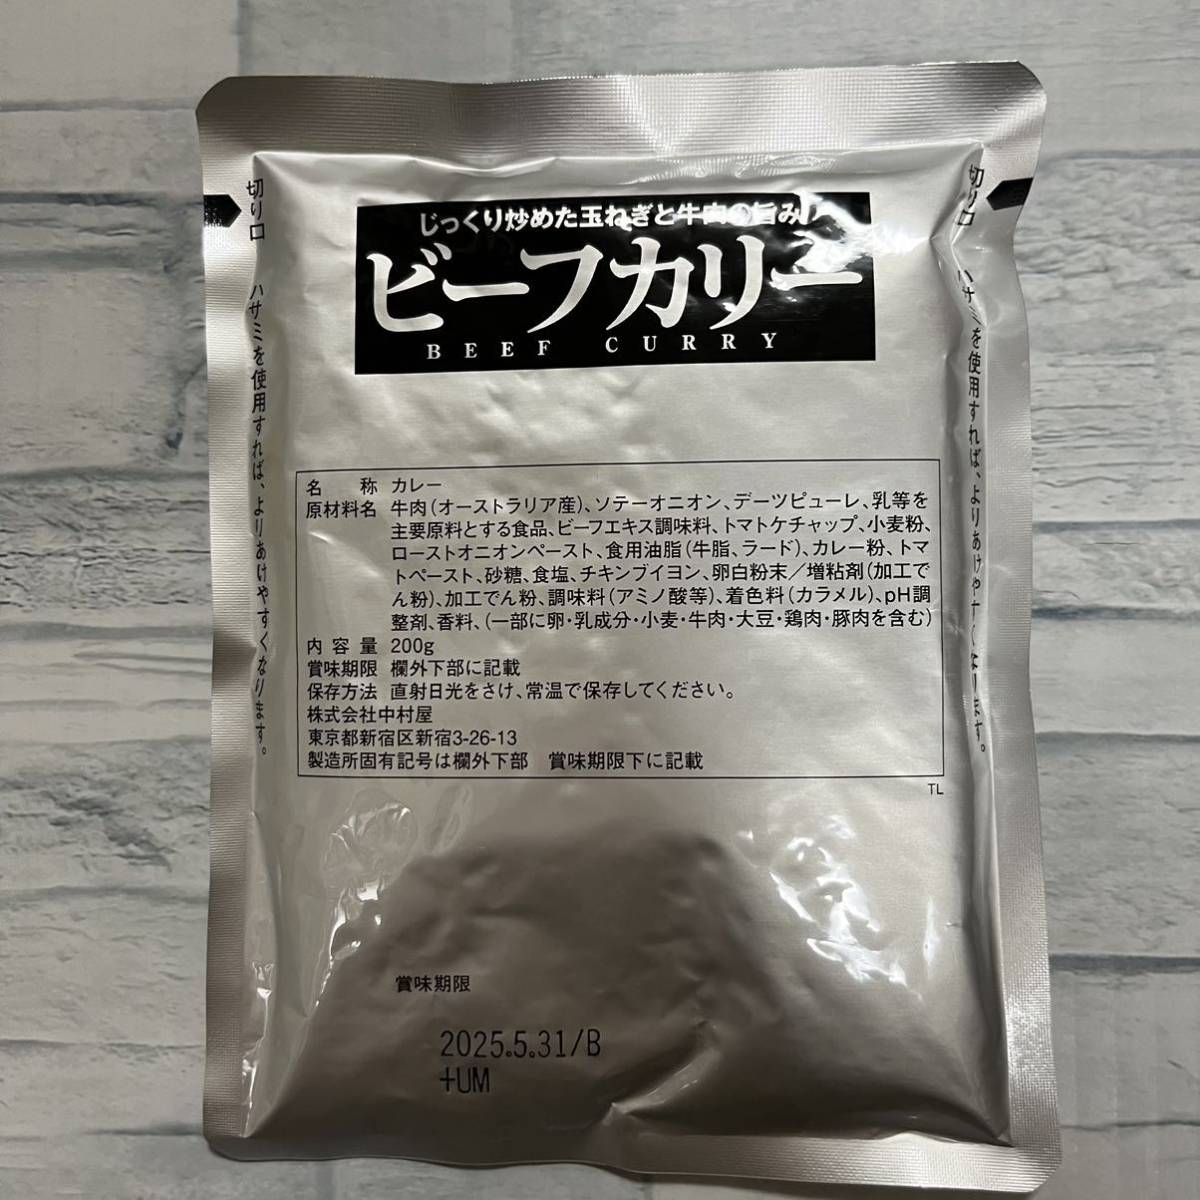  Shinjuku Nakamura shop beef ka Lee 200g 8 sack retort-pouch curry middle . disaster strategic reserve food provide for low ring stock cost ko beef curry business use emergency rations 